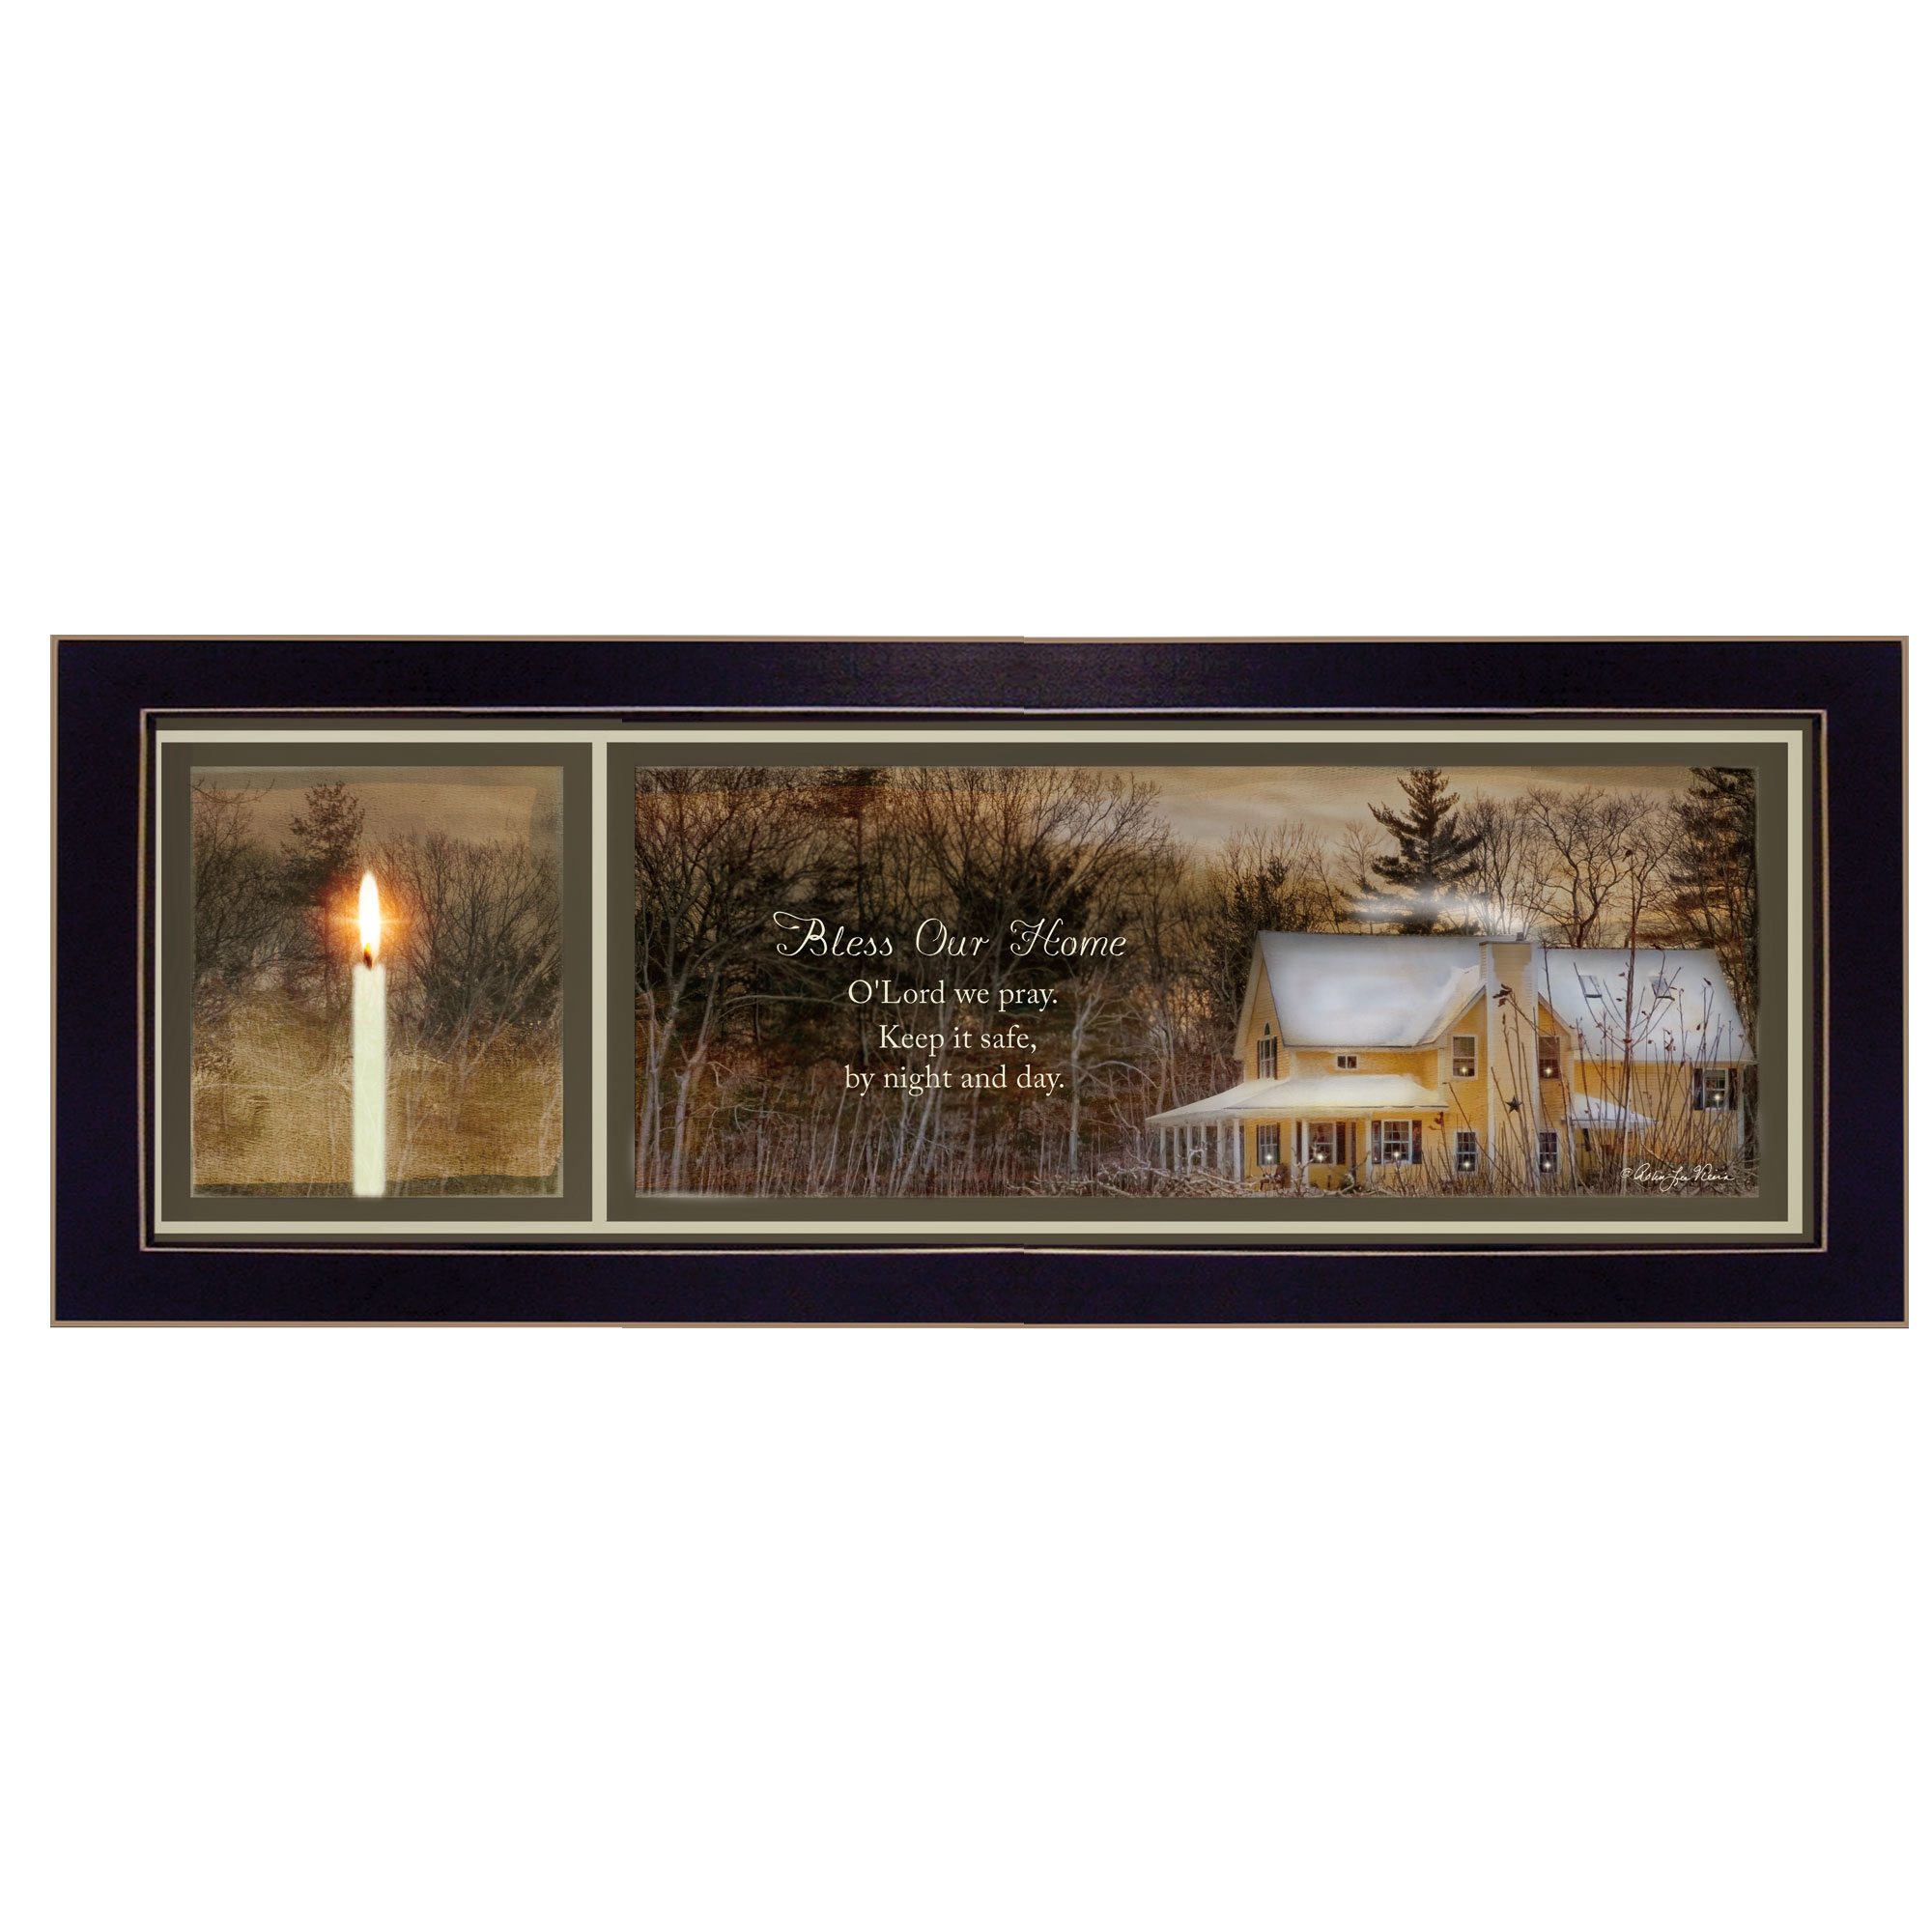 "God Bless Our Home" By Robin-Lee Vieira, Printed Wall Art, Ready To Hang Framed Poster, Black Frame